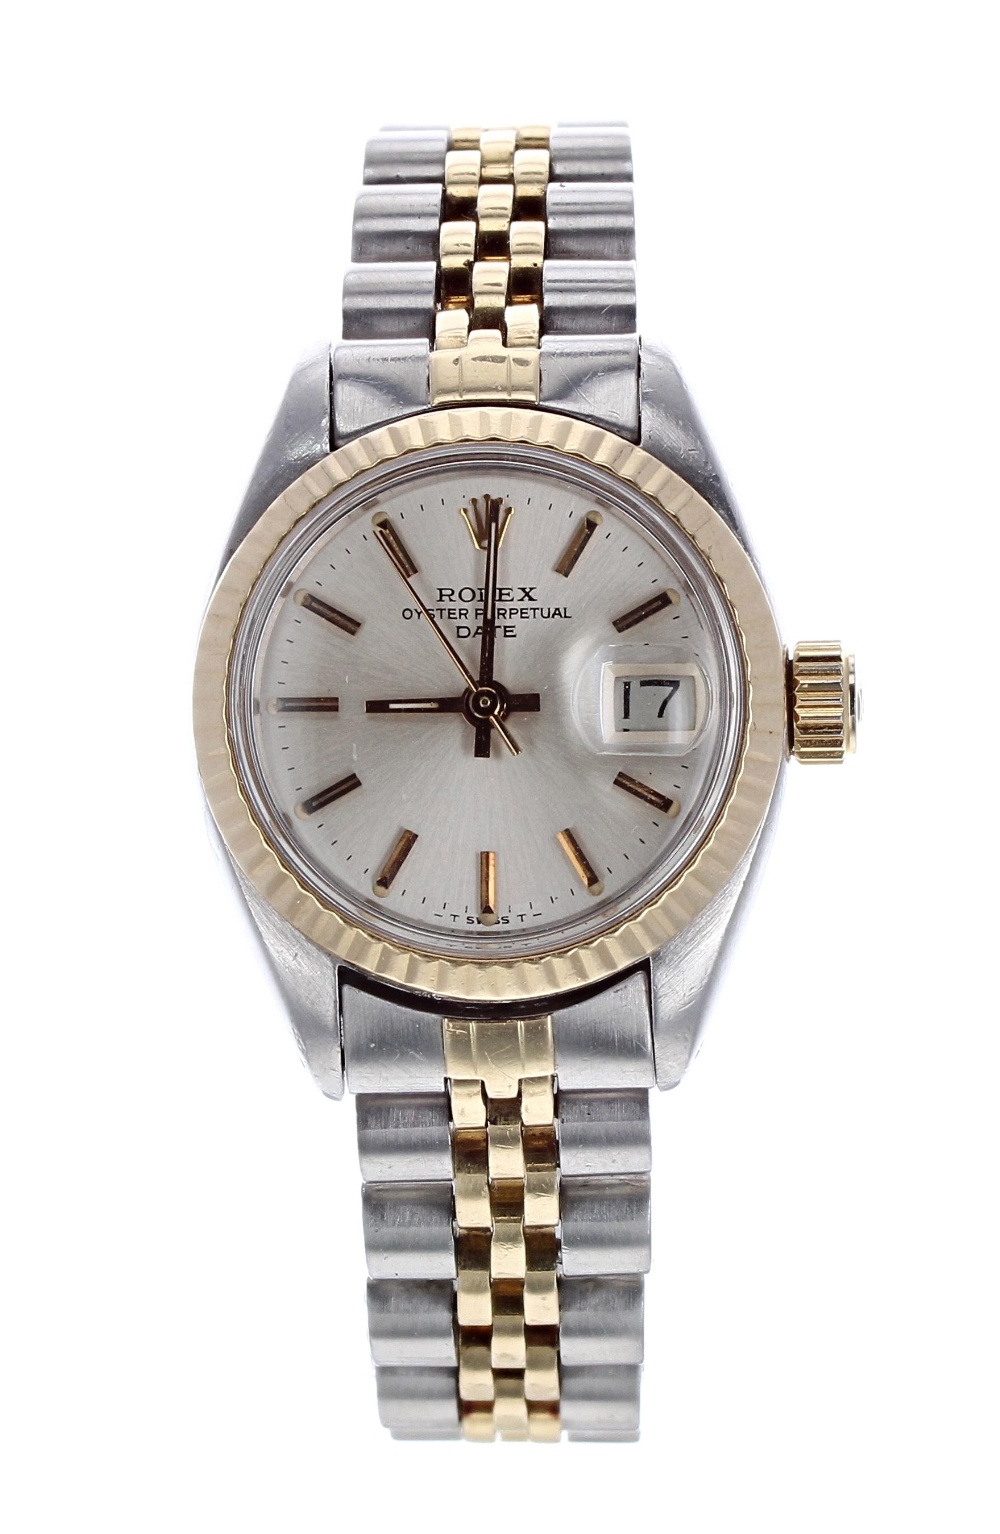 Rolex Oyster Perpetual Datejust gold and stainless steel lady's bracelet watch, ref. 6917, circa